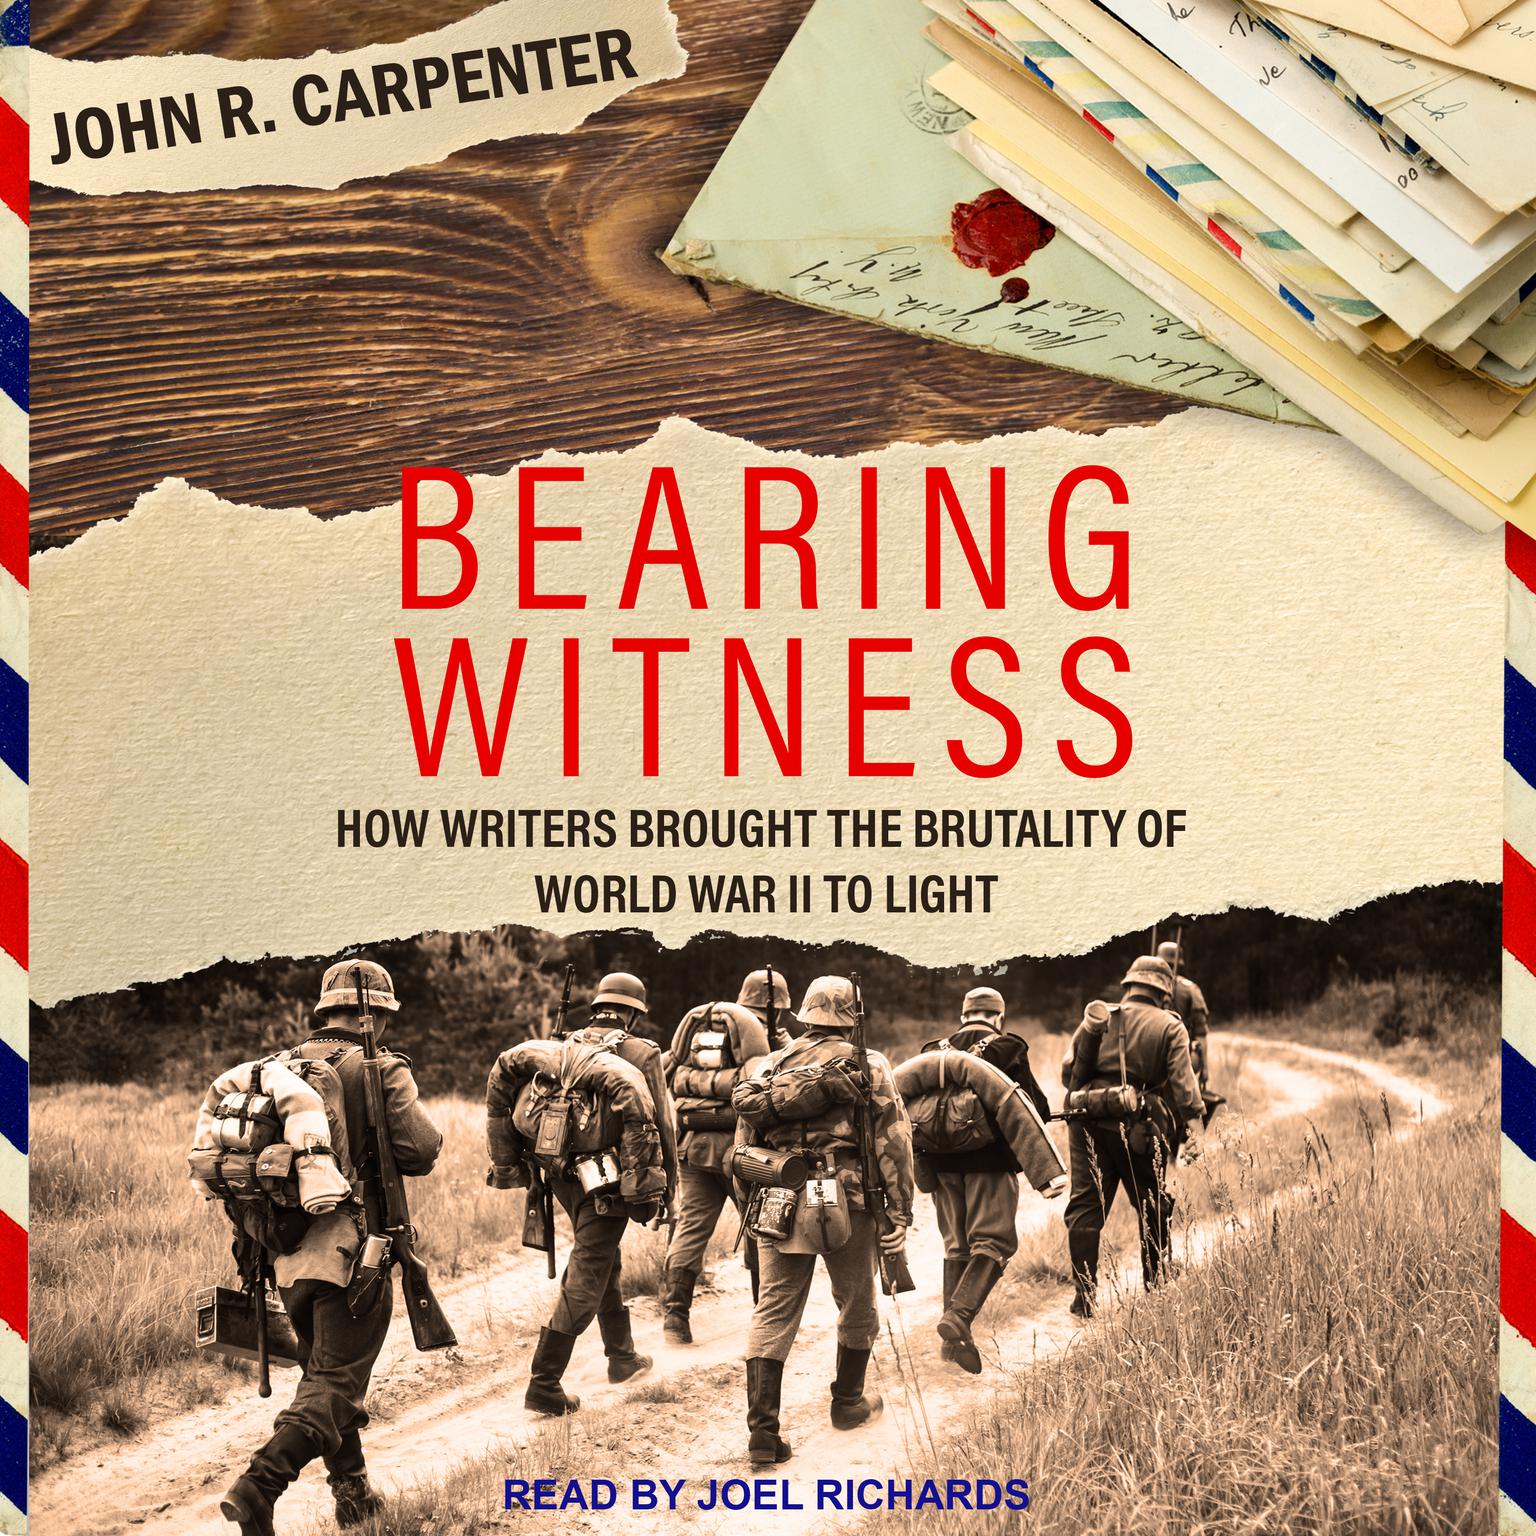 Bearing Witness: How Writers Brought the Brutality of World War II to Light Audiobook, by John R. Carpenter